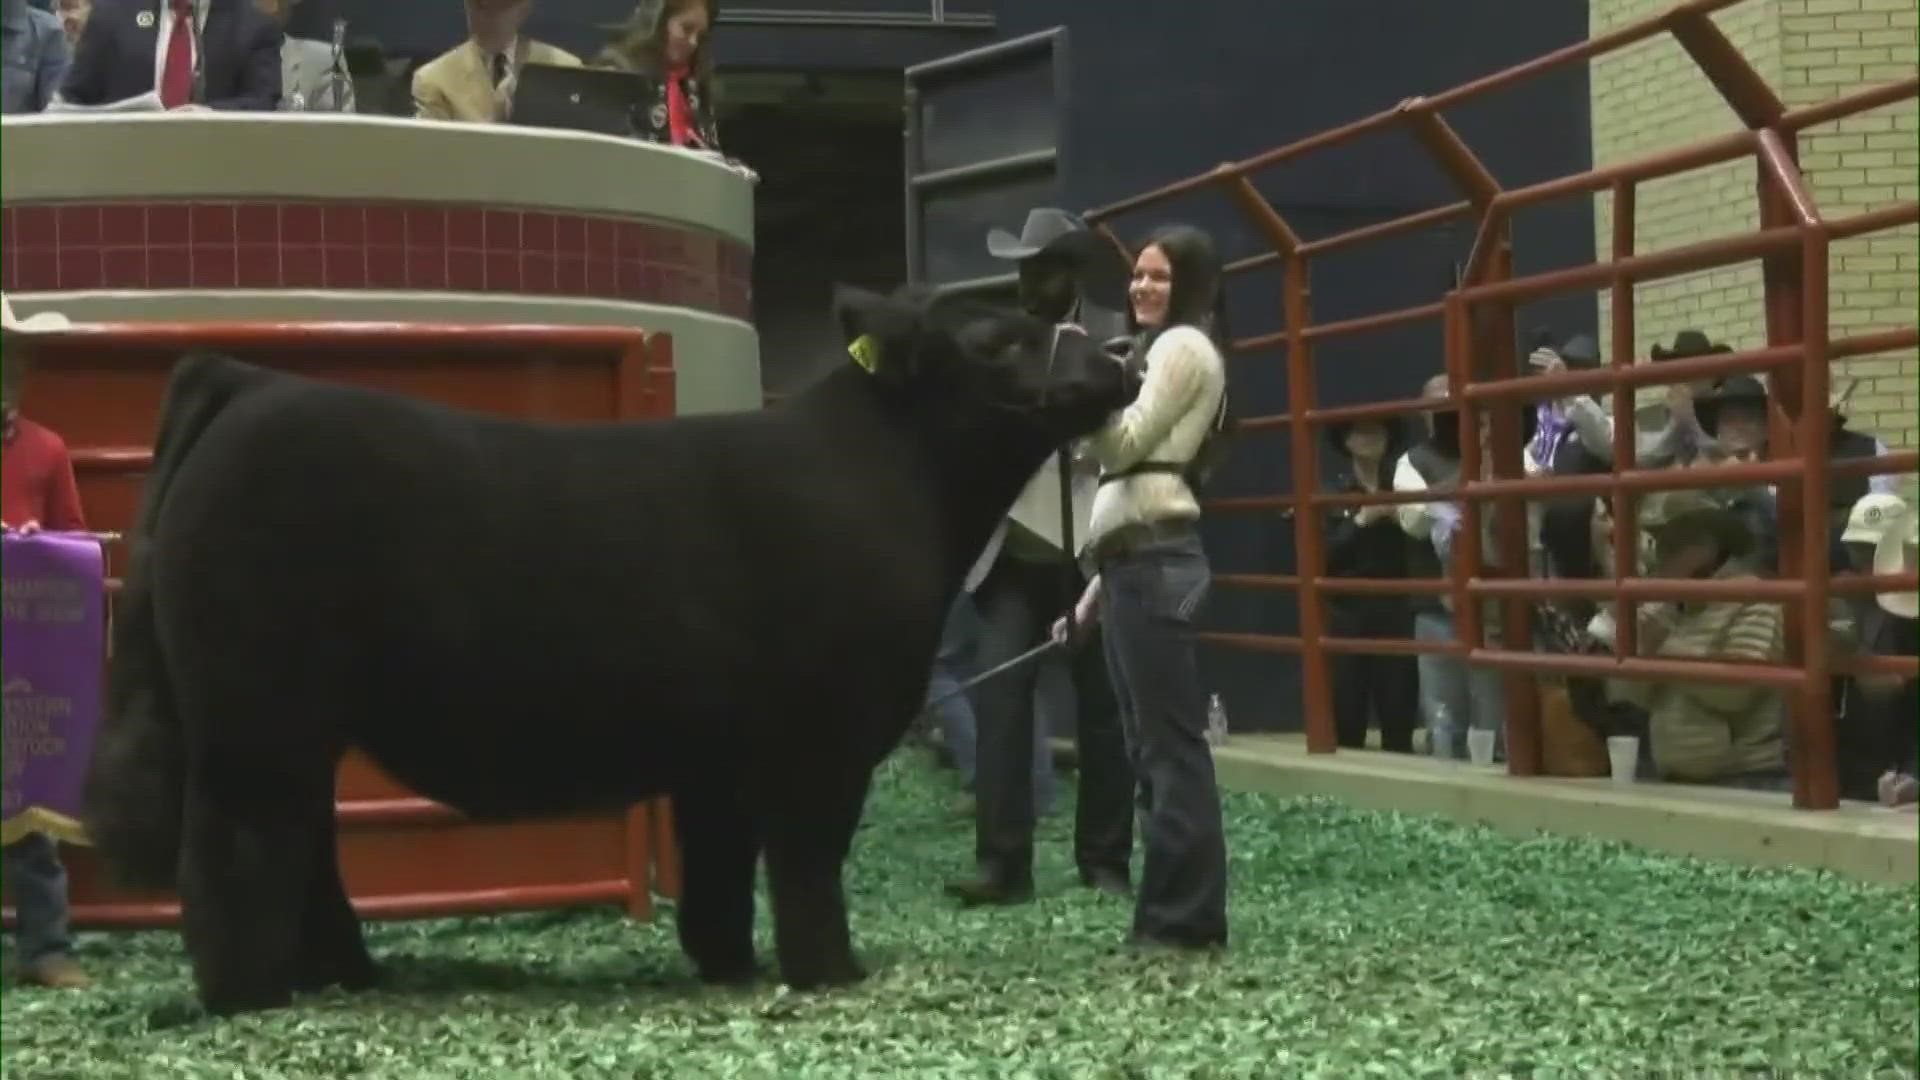 A 15-year-old auctioned off the 1,343-pound steer at the Fort Worth Stock Show for a record $440,000